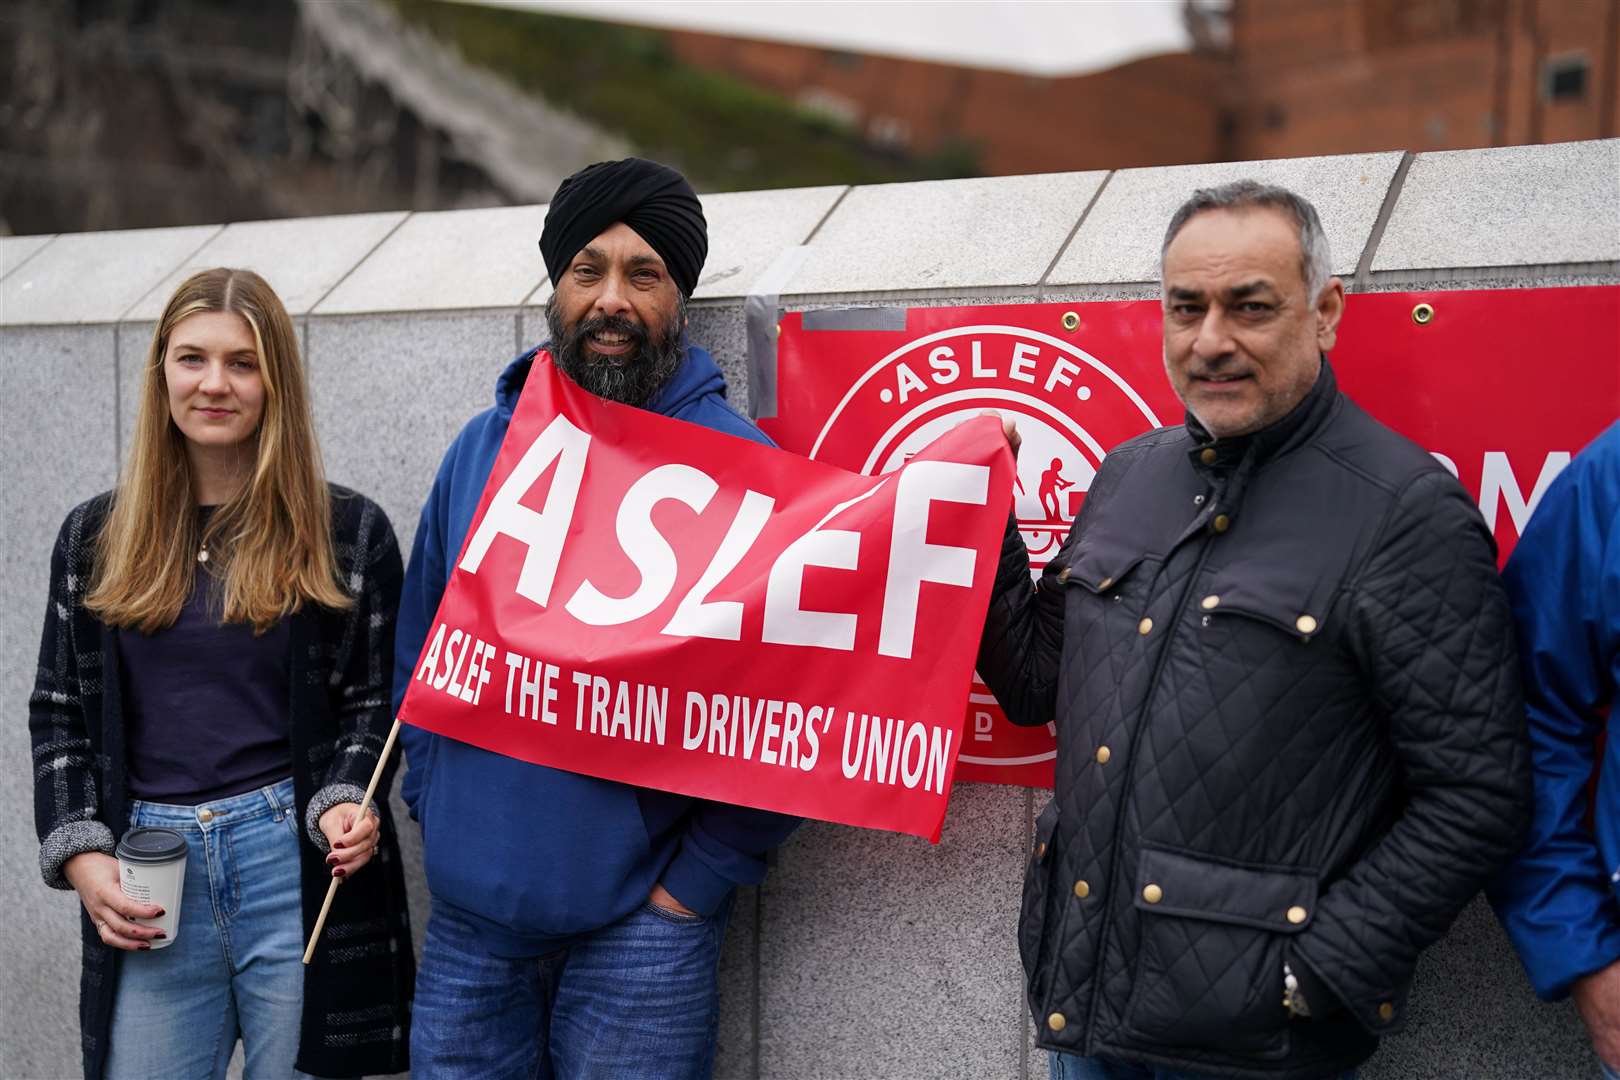 Members of the drivers’ union Aslef on the picket line at New Street station in Birmingham (Jacob King/PA)